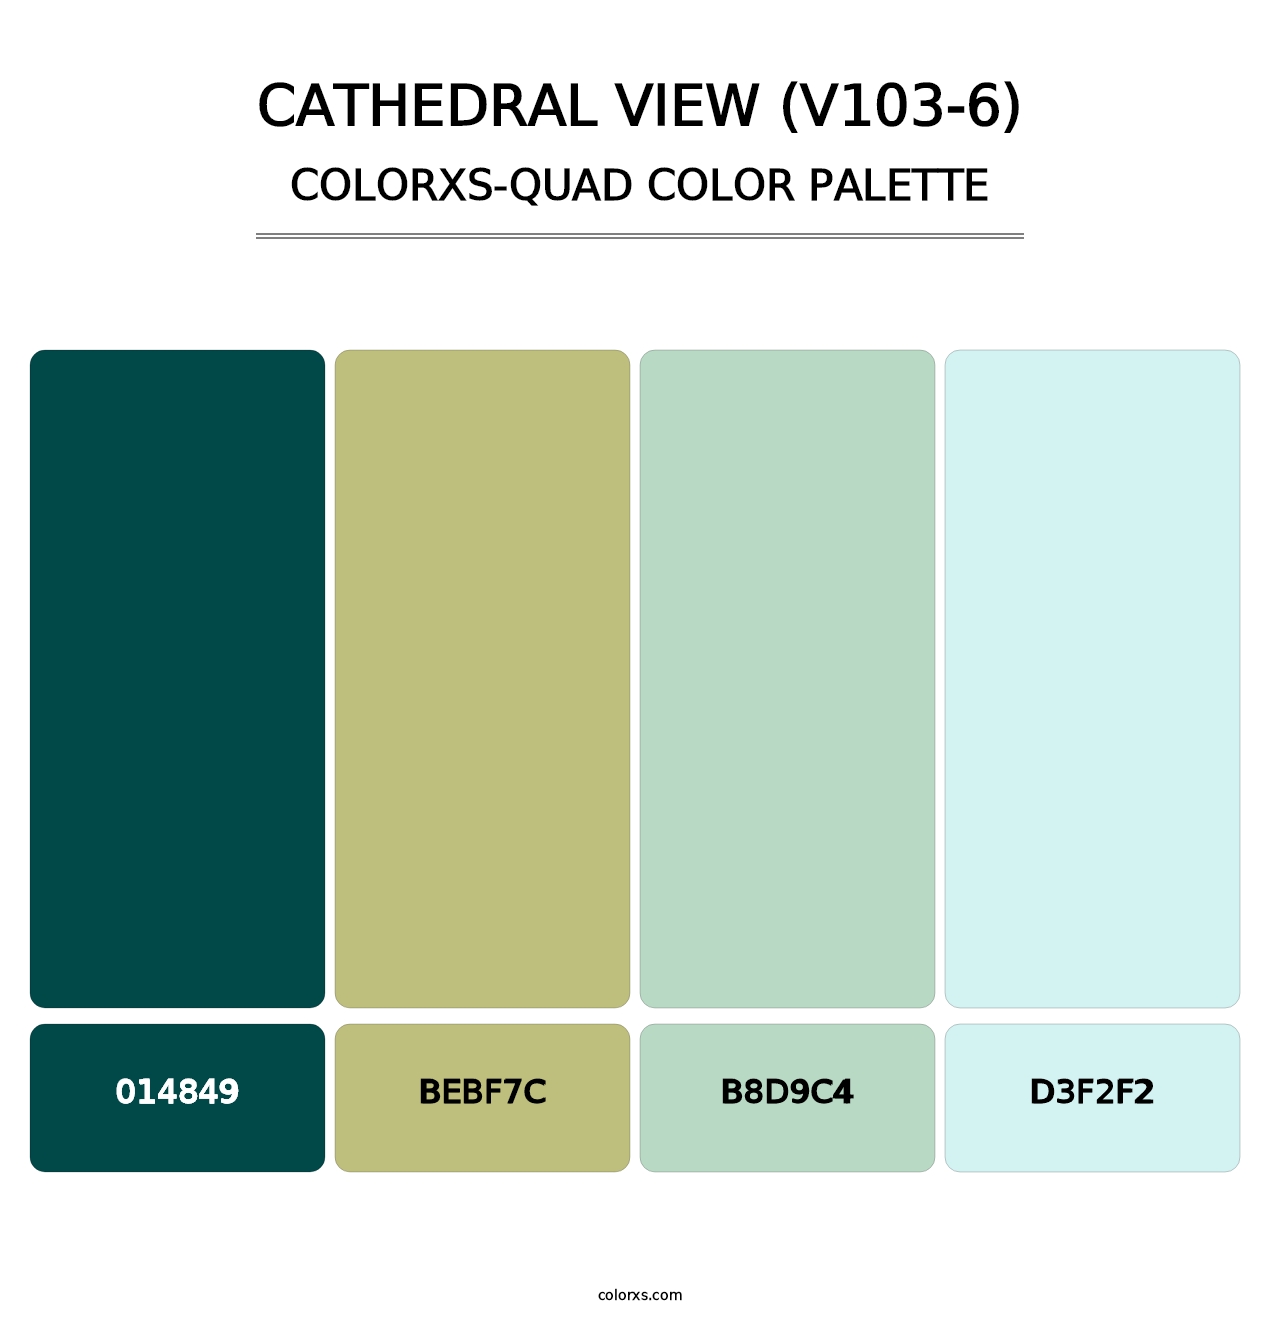 Cathedral View (V103-6) - Colorxs Quad Palette